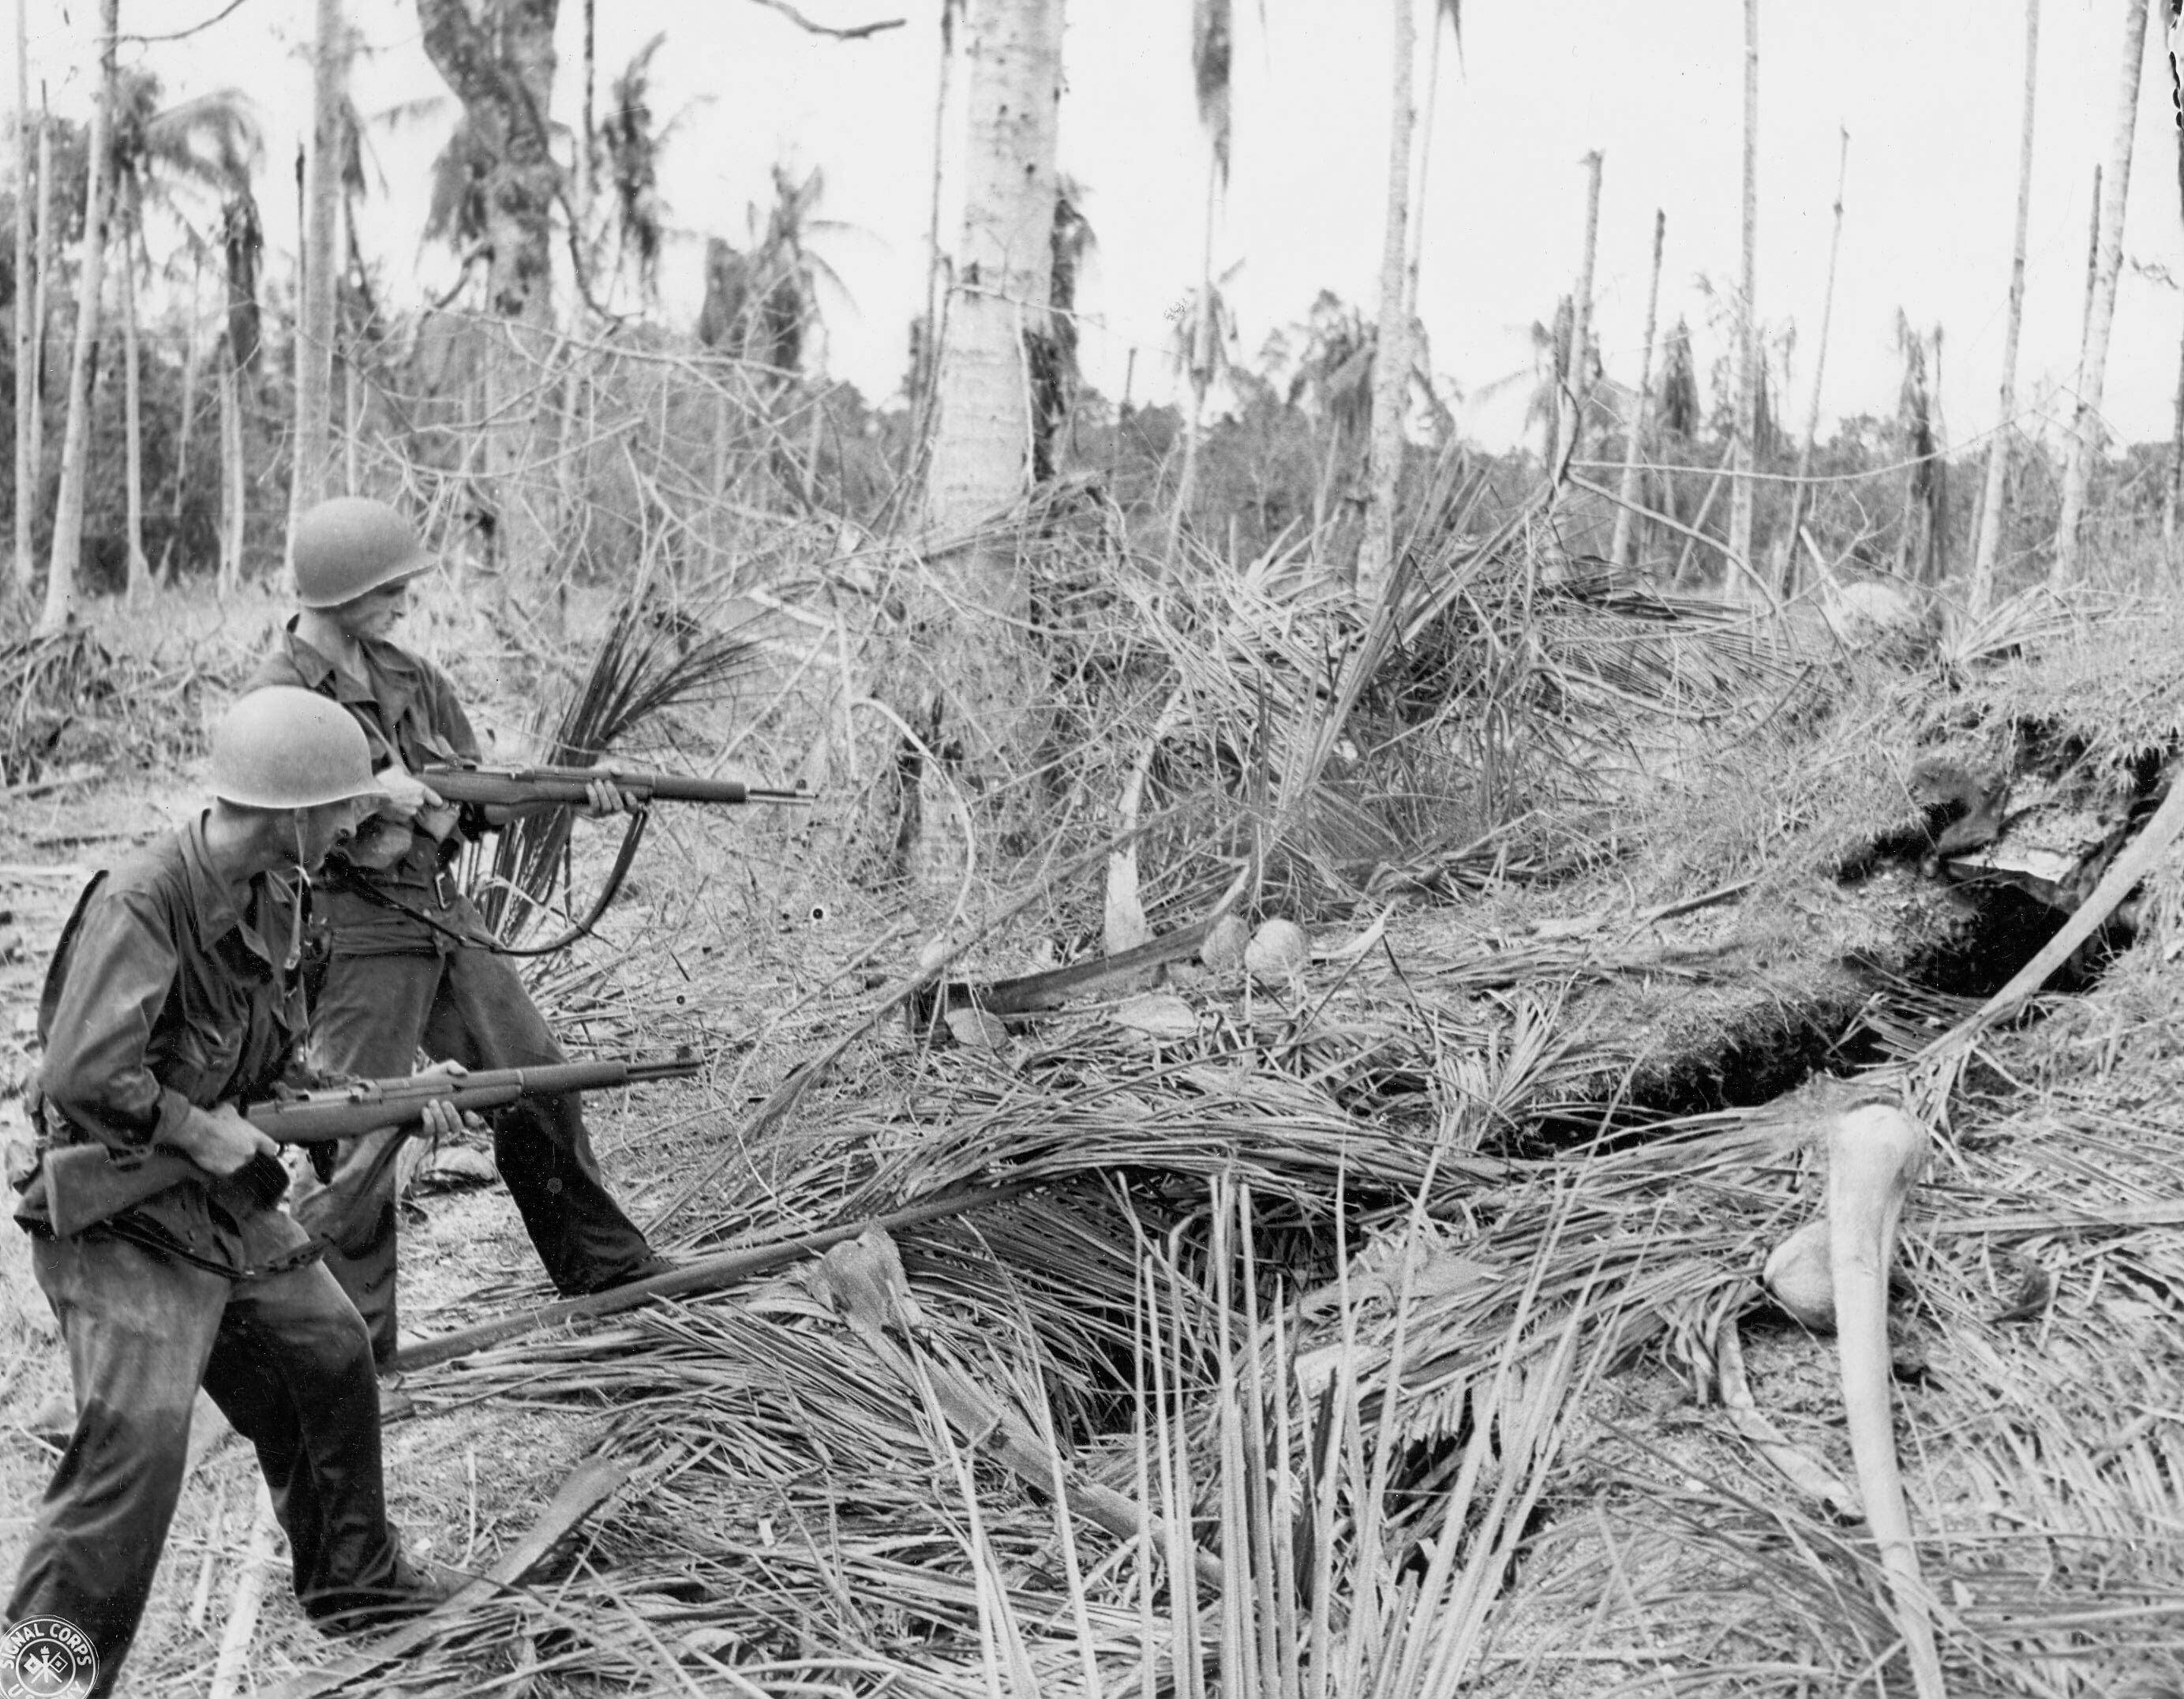 Soldiers of US 32nd Division probing a Japanese foxhole at New Guinea, Dec 1942; note M1 Garand rifles